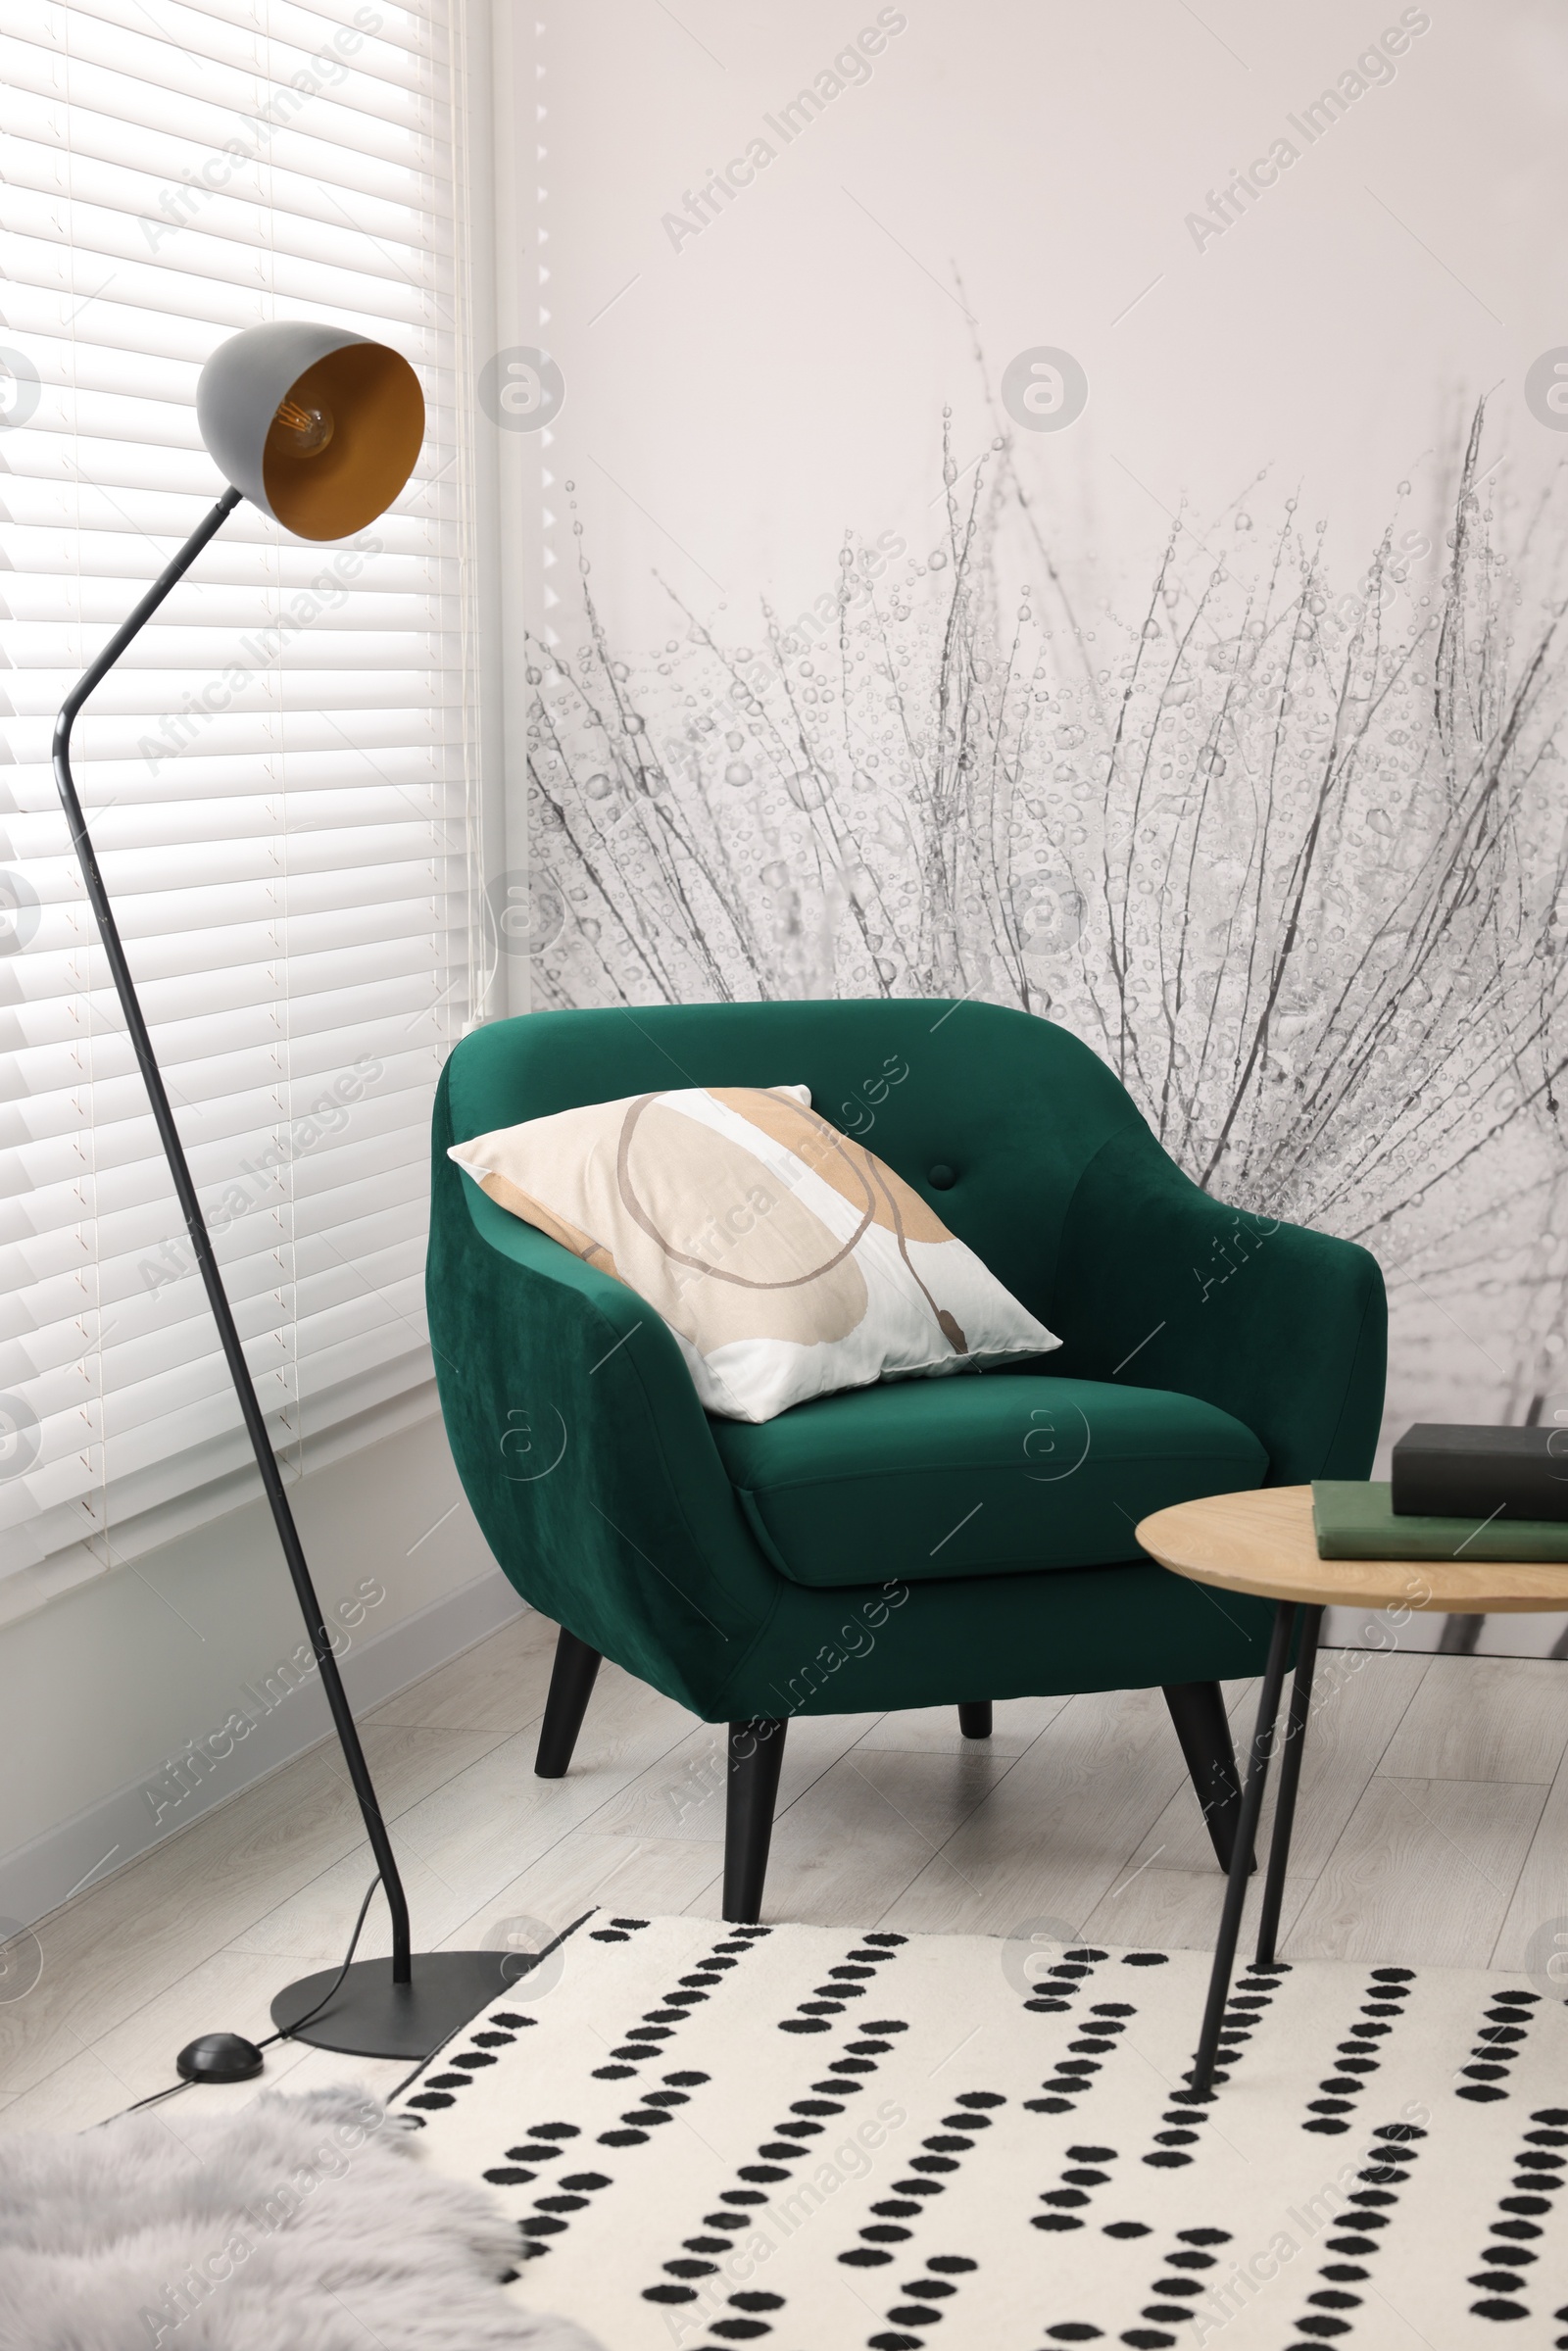 Photo of Comfortable armchair, lamp and side table in stylish room